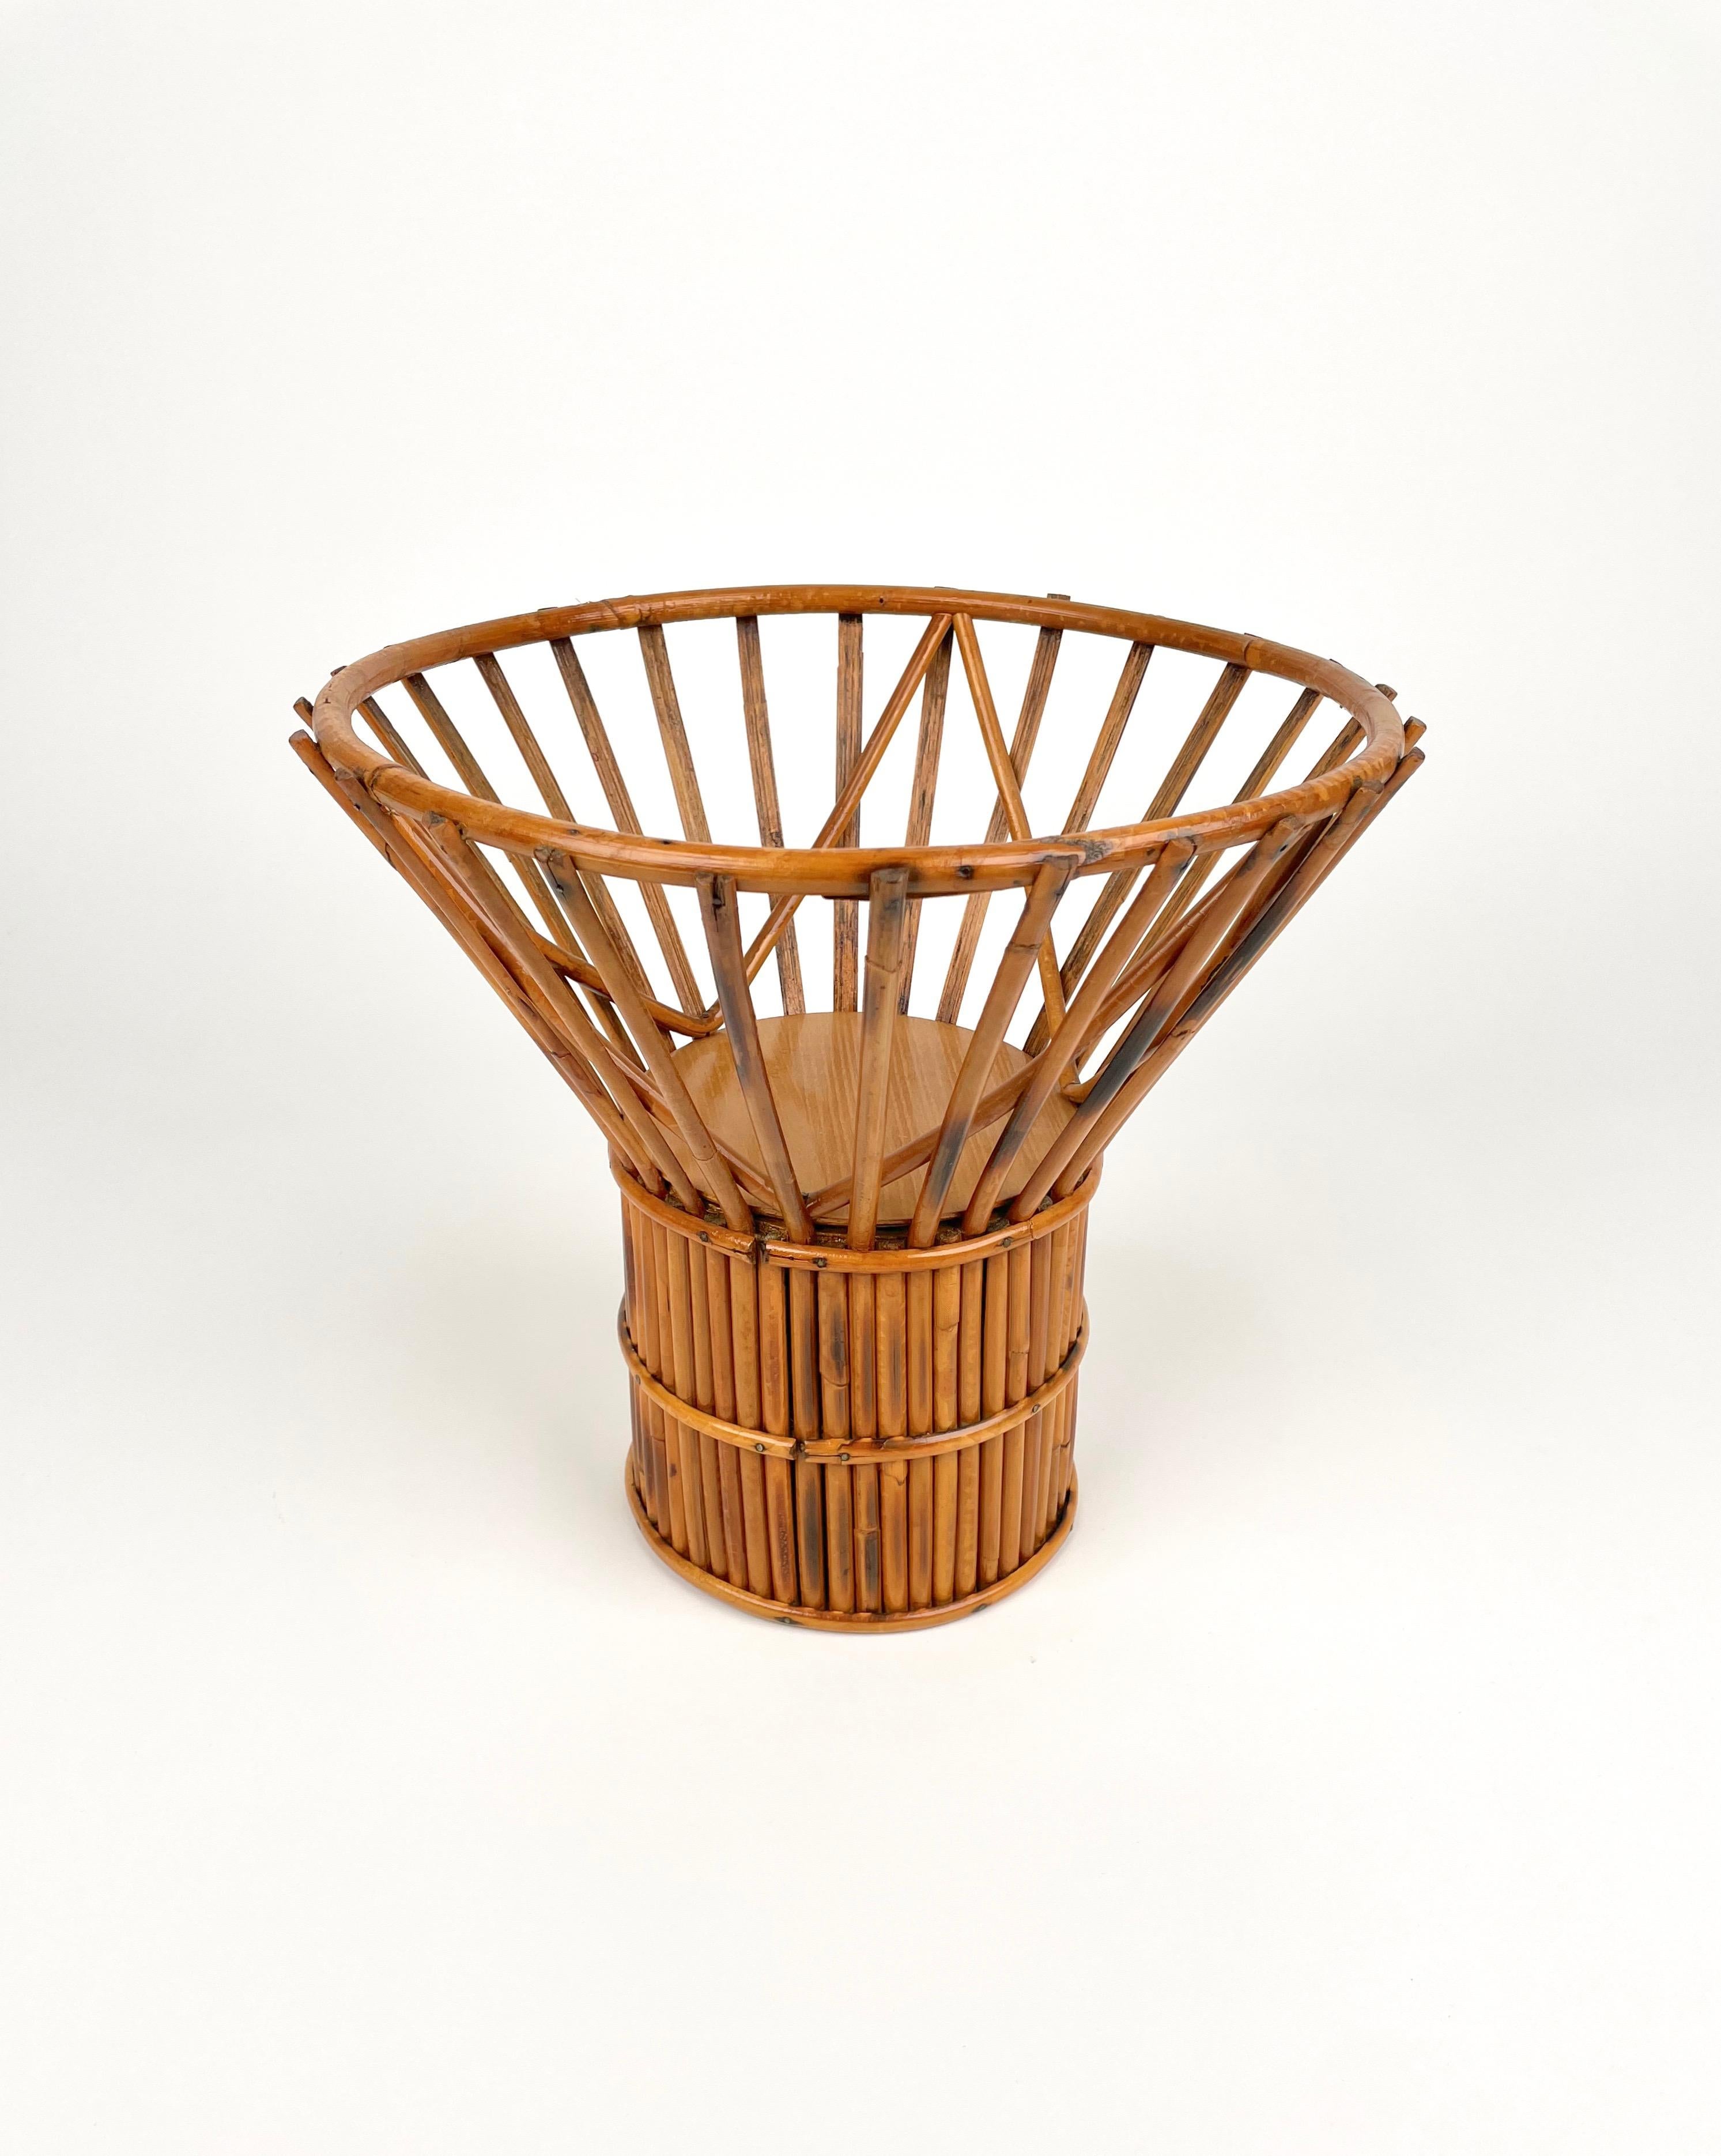 Heightened fruit bowl or centerpiece in bamboo and rattan.

Made in Italy in the 1960s.